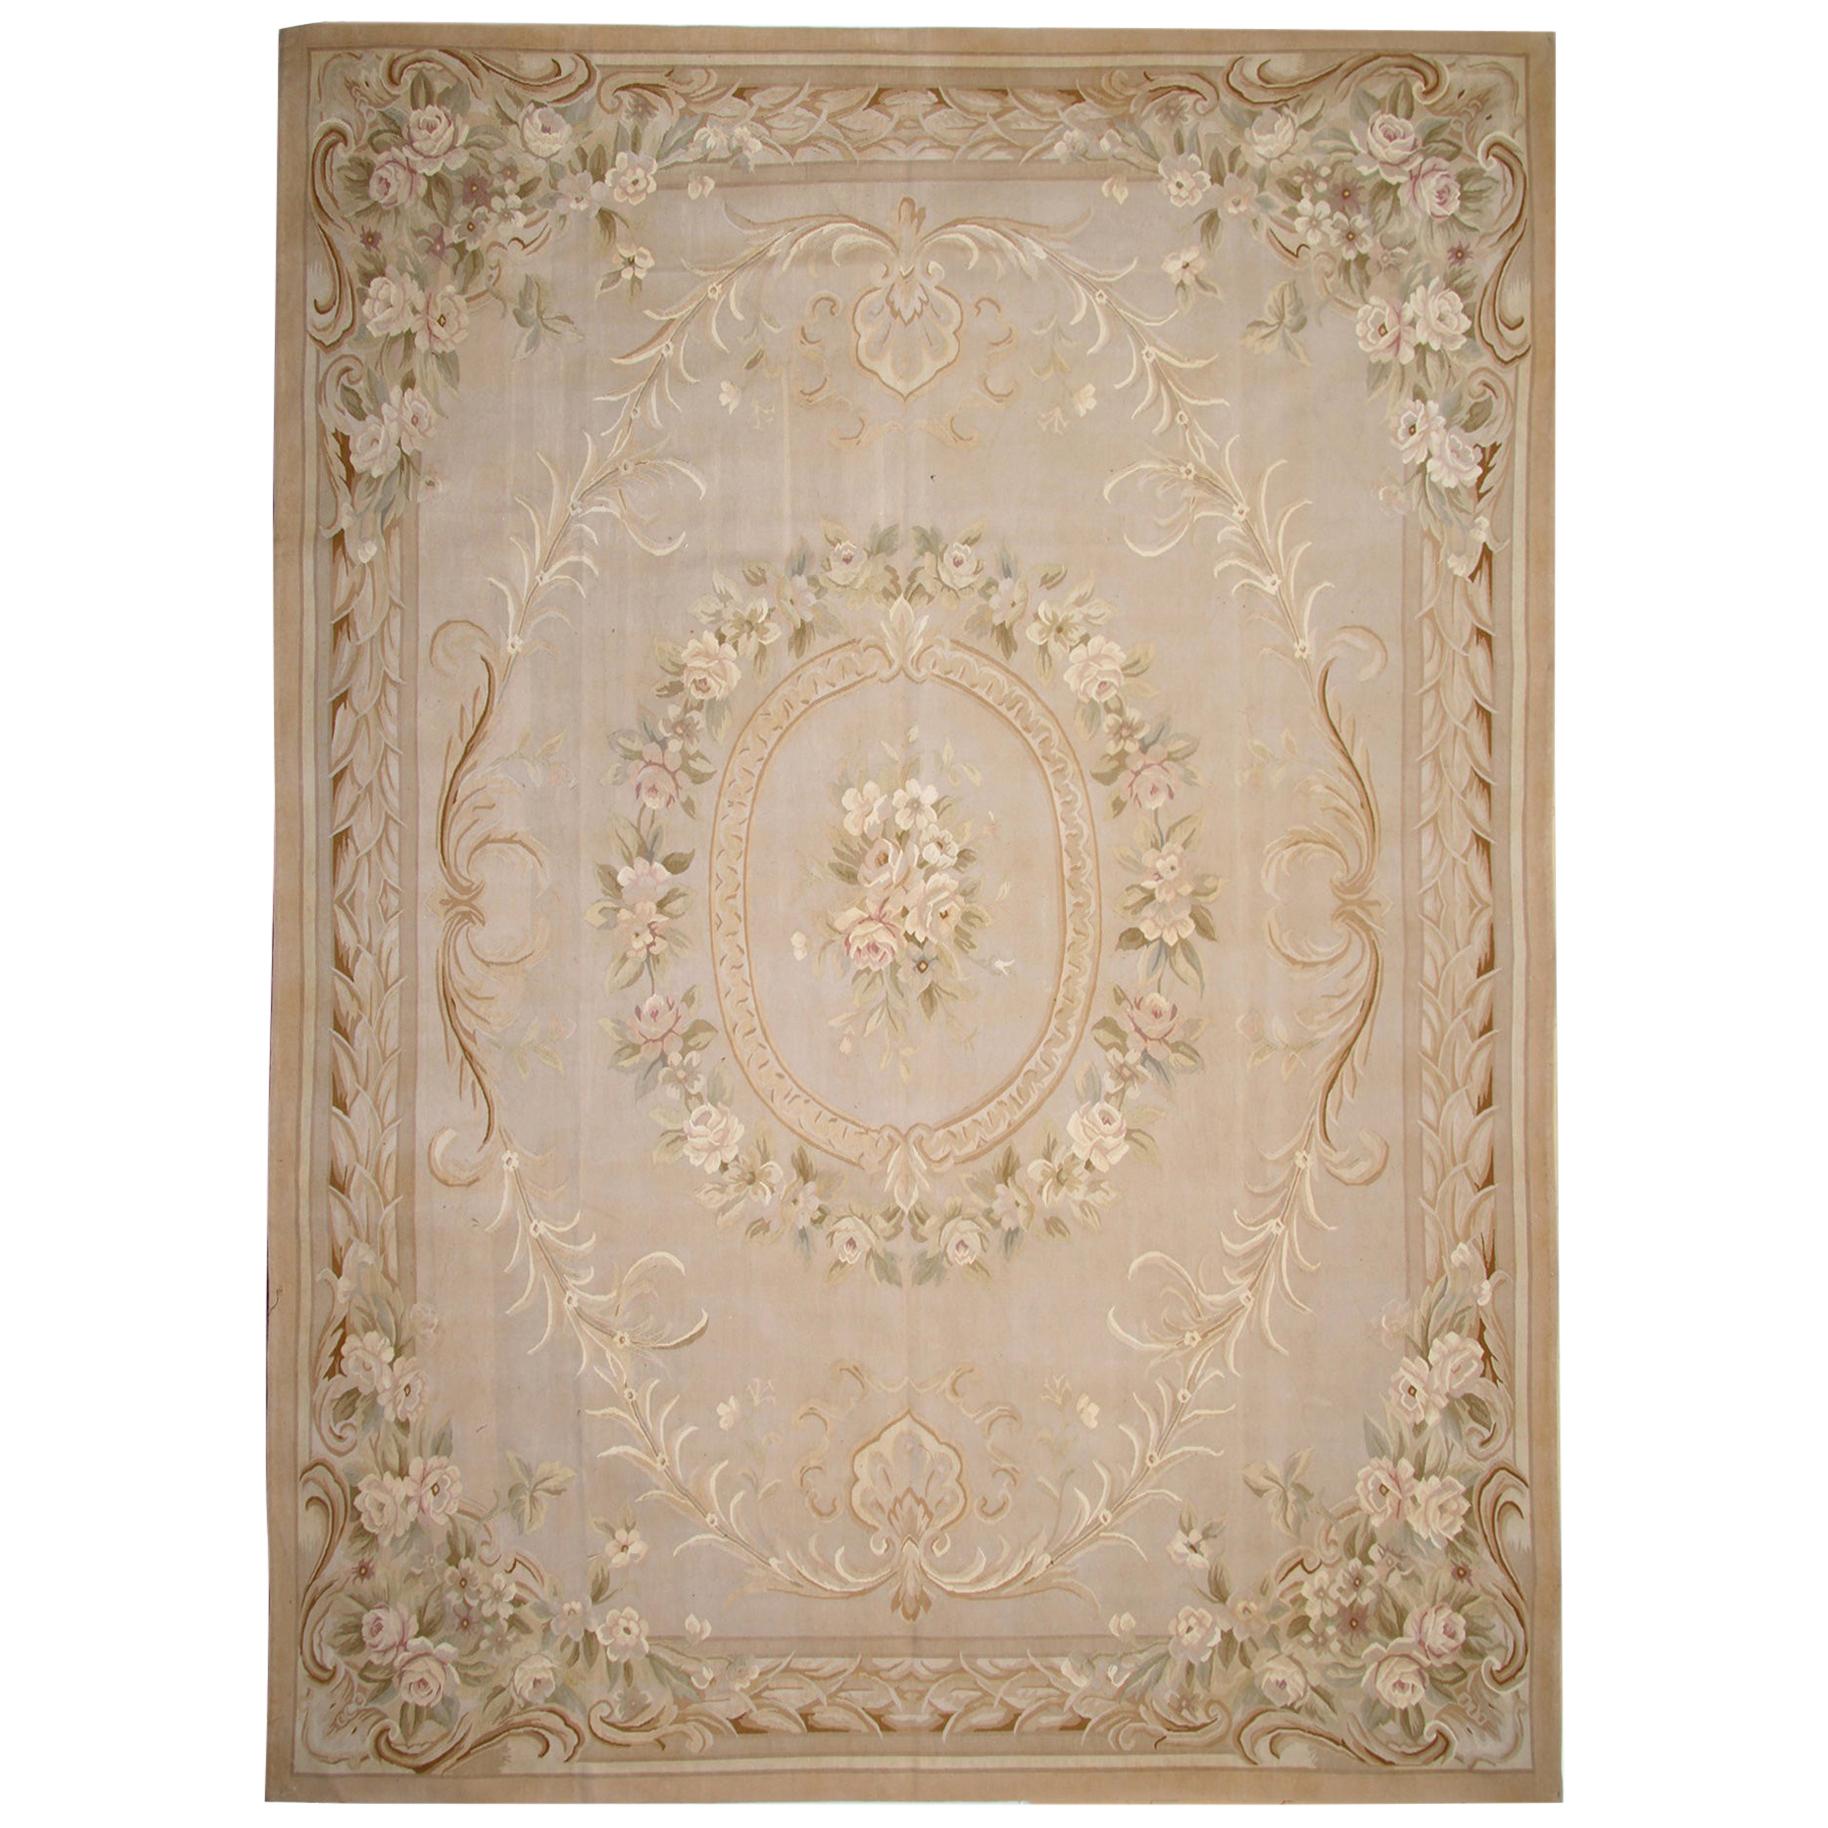 Traditional Aubusson Style Rug Tapestry Area Rug Handwoven Wool For Sale